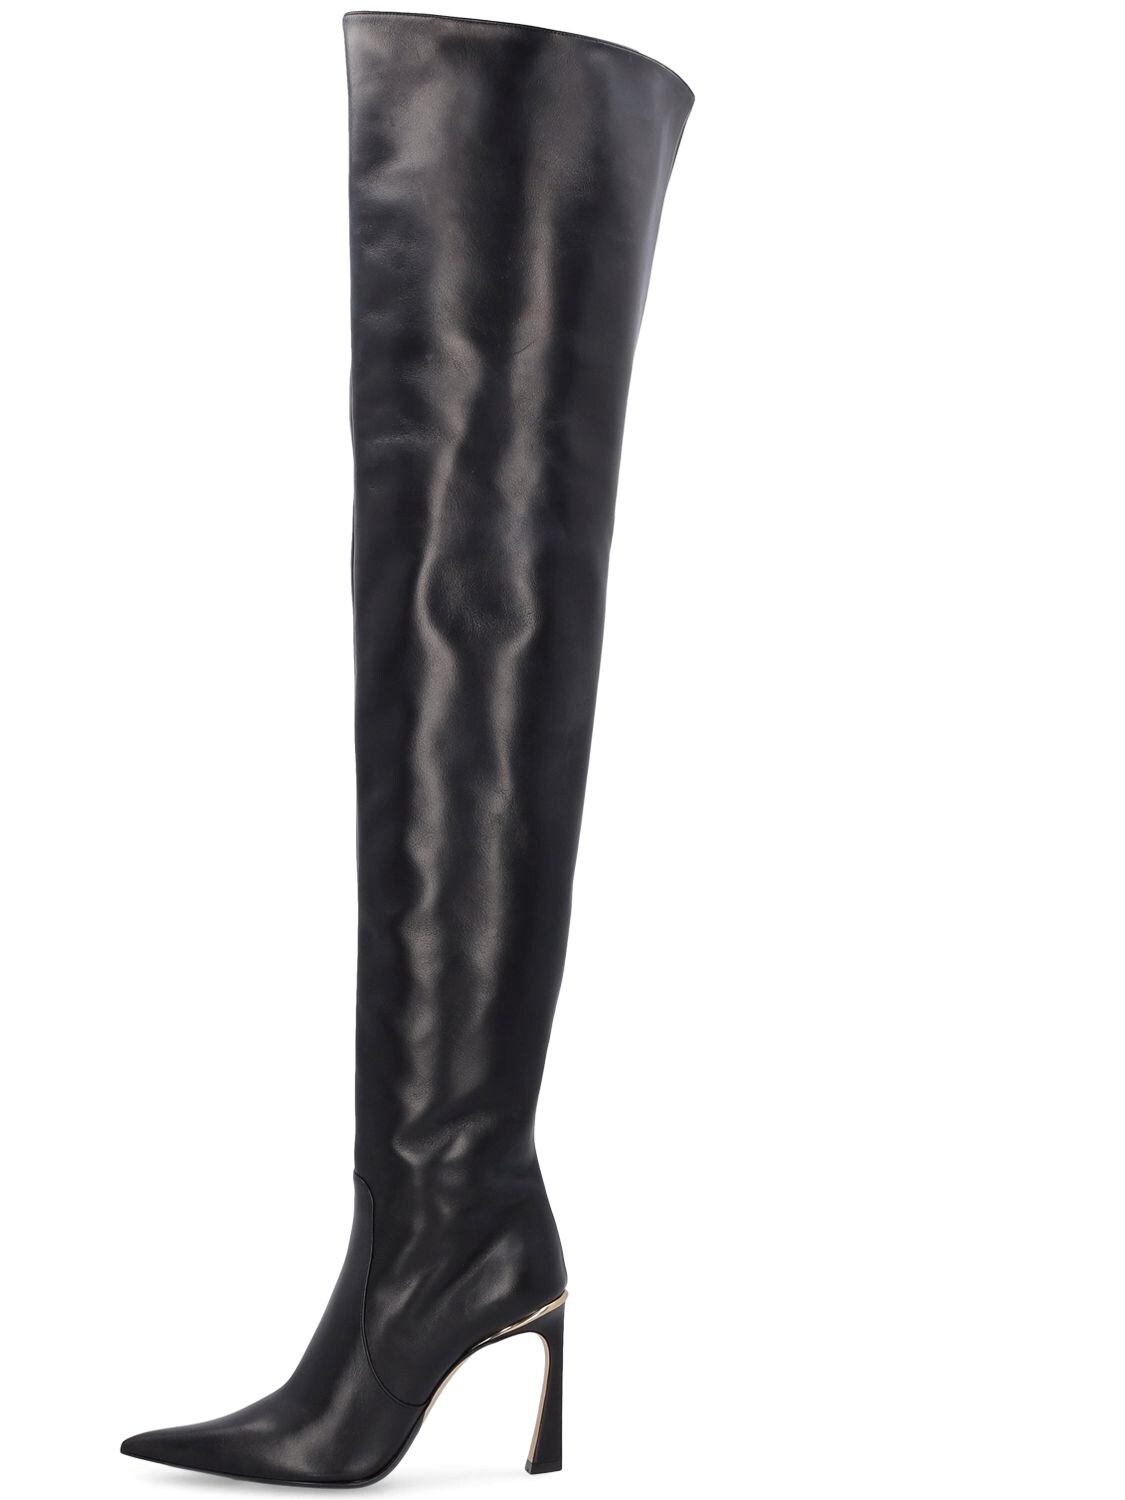 VICTORIA BECKHAM 105MM LEATHER OVER-THE-KNEE BOOTS